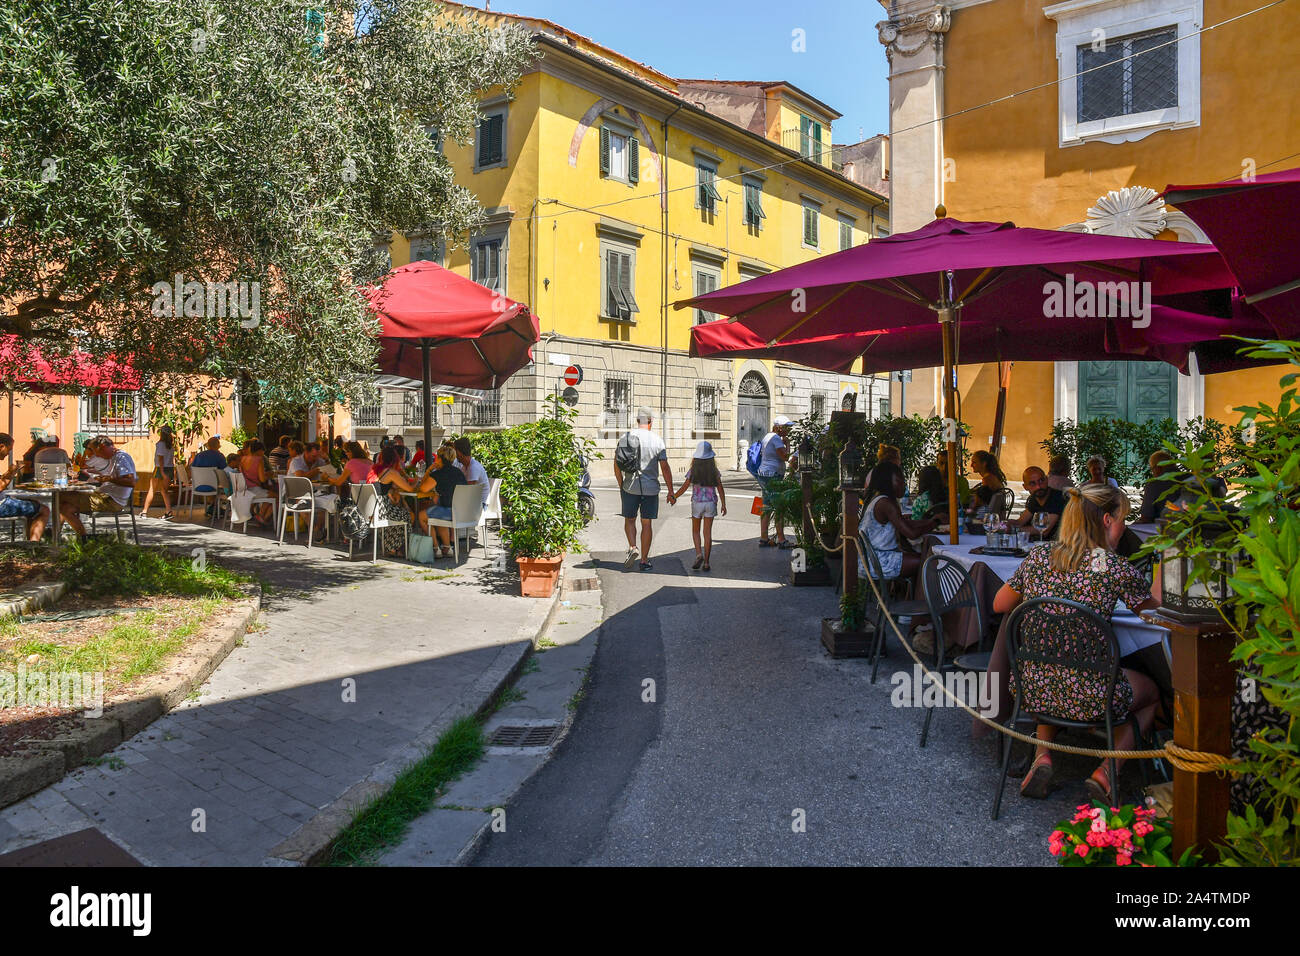 Street view of the historic centre of the famous town of Pisa with outdoor restaurants full of people and tourists lunching in summer, Tuscany, Italy Stock Photo